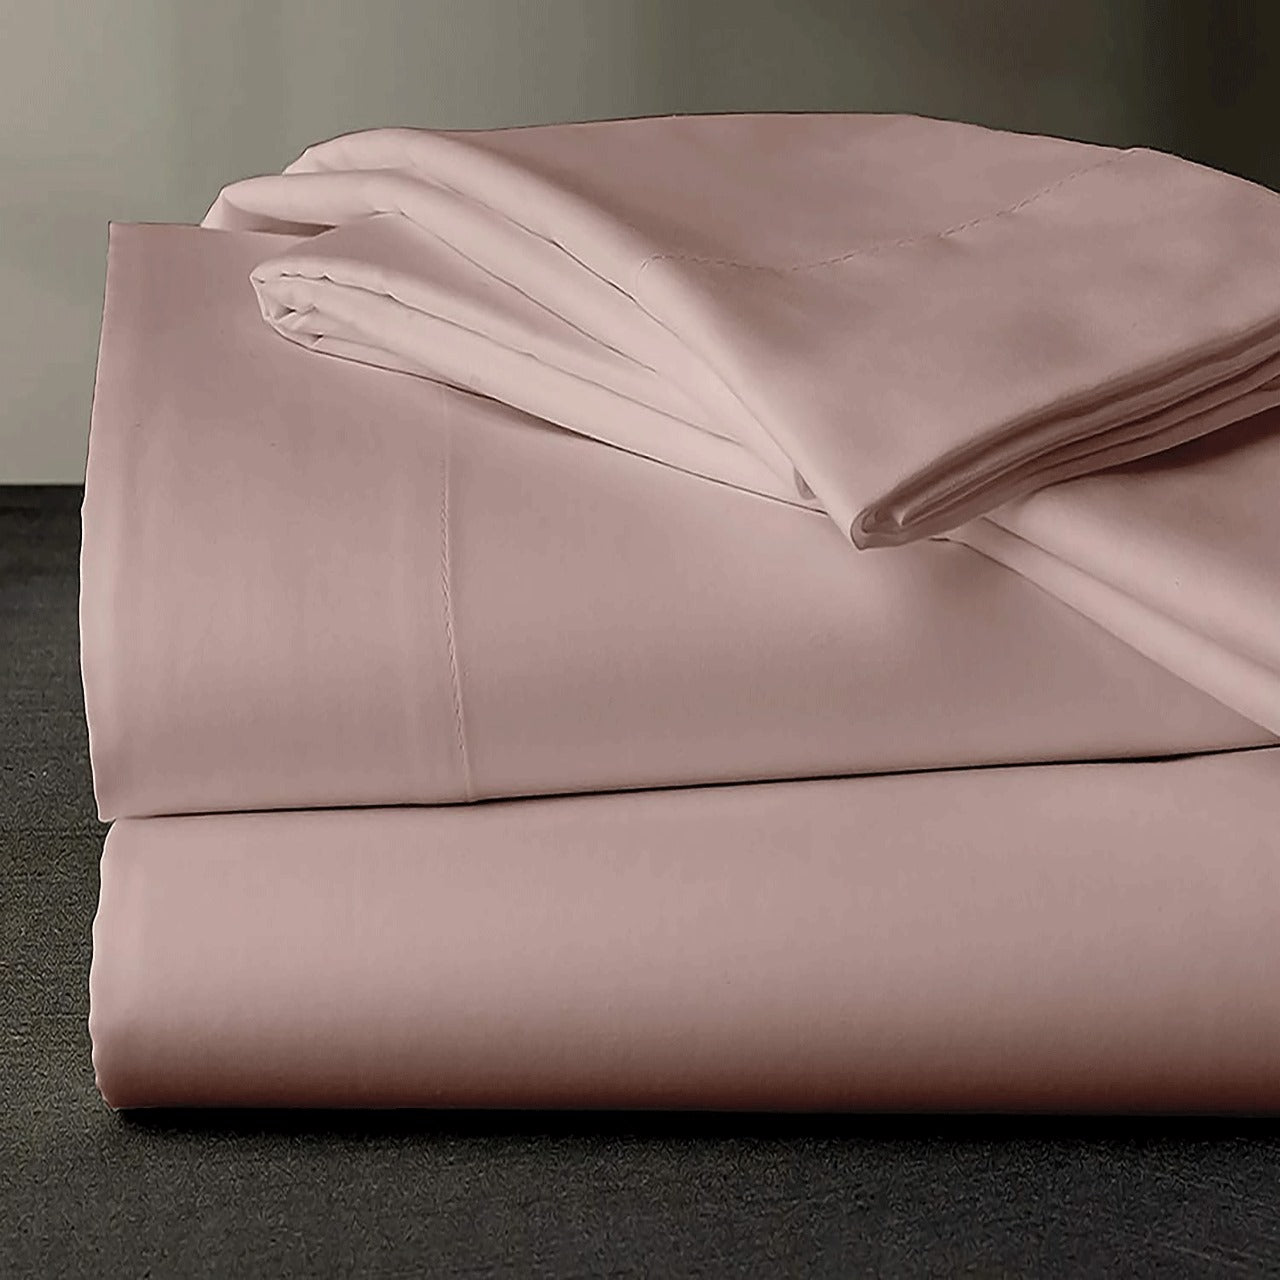 EUQIFAH Cotton Sateen Bed Sheet Set - Soft, Silky, Shiny - Luxurious Comfort Bedding - Fade & Shrink Resistant -T300-4 Pieces (Queen Size) (Iceberg) Visit the EUQIFAH Store